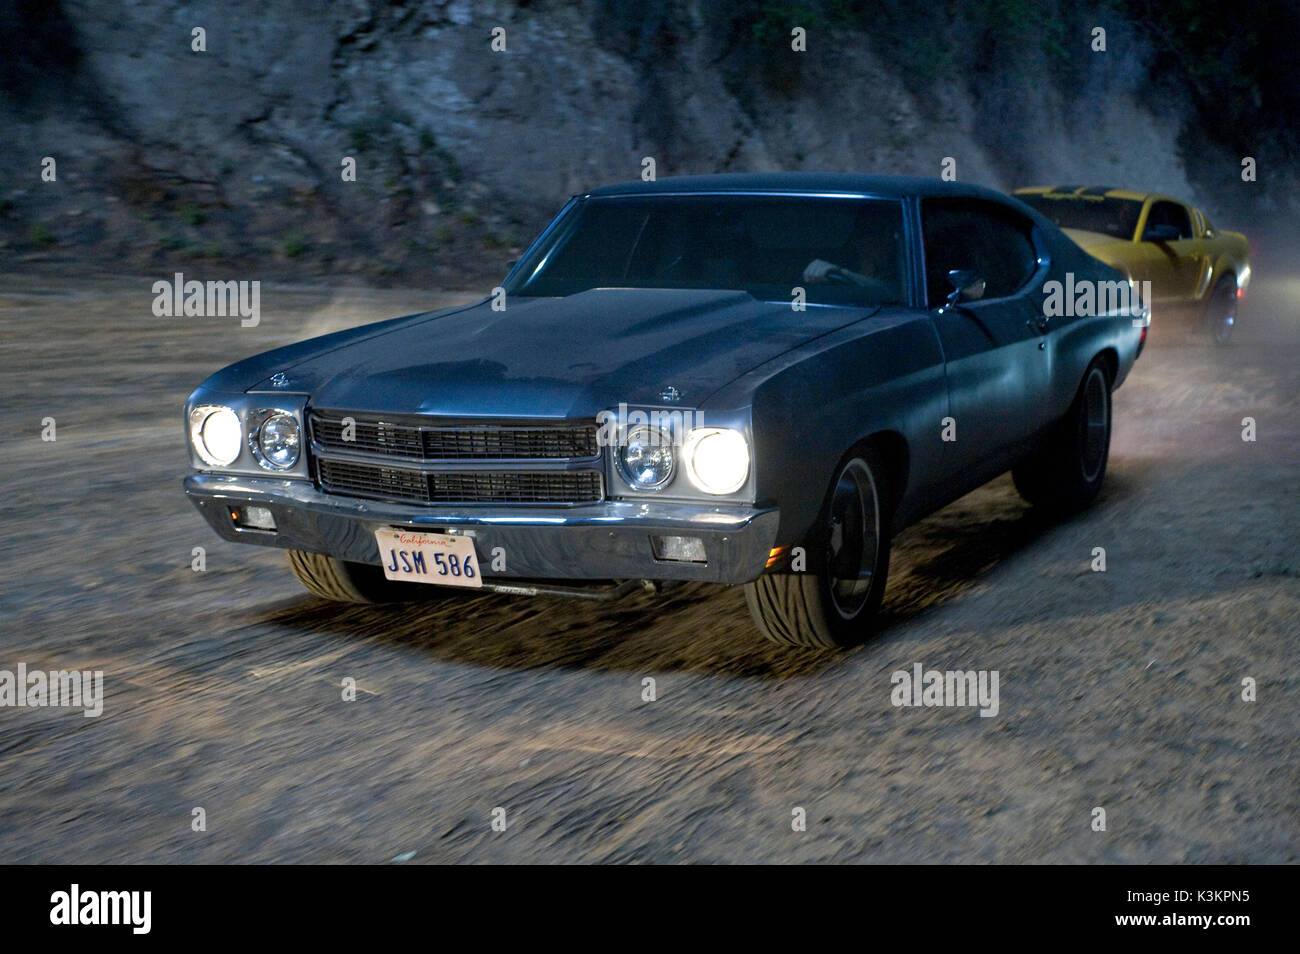 FAST & FURIOUS [US 2009] alias FAST & FURIOUS 4 Dom Toretto's Chevelle 1970 date : 2009 Banque D'Images